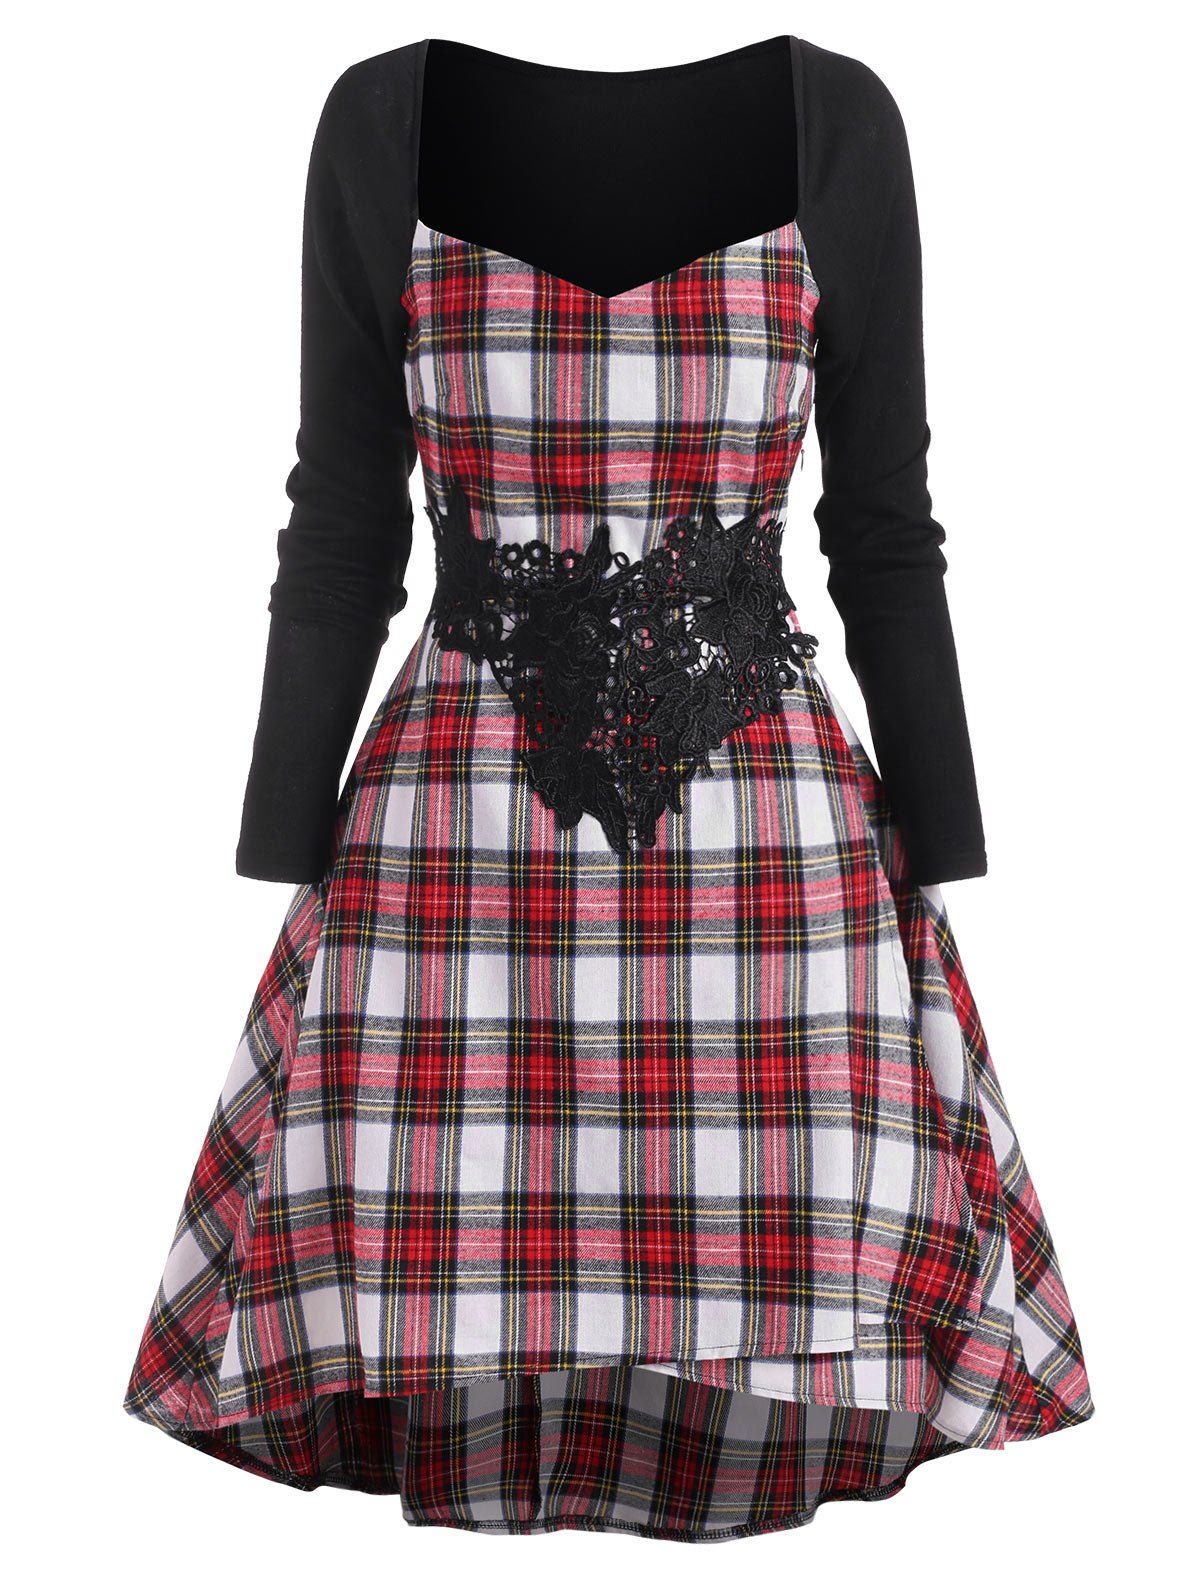 Guipure Insert Plaid Sweetheart High Low Dress - multicolor L